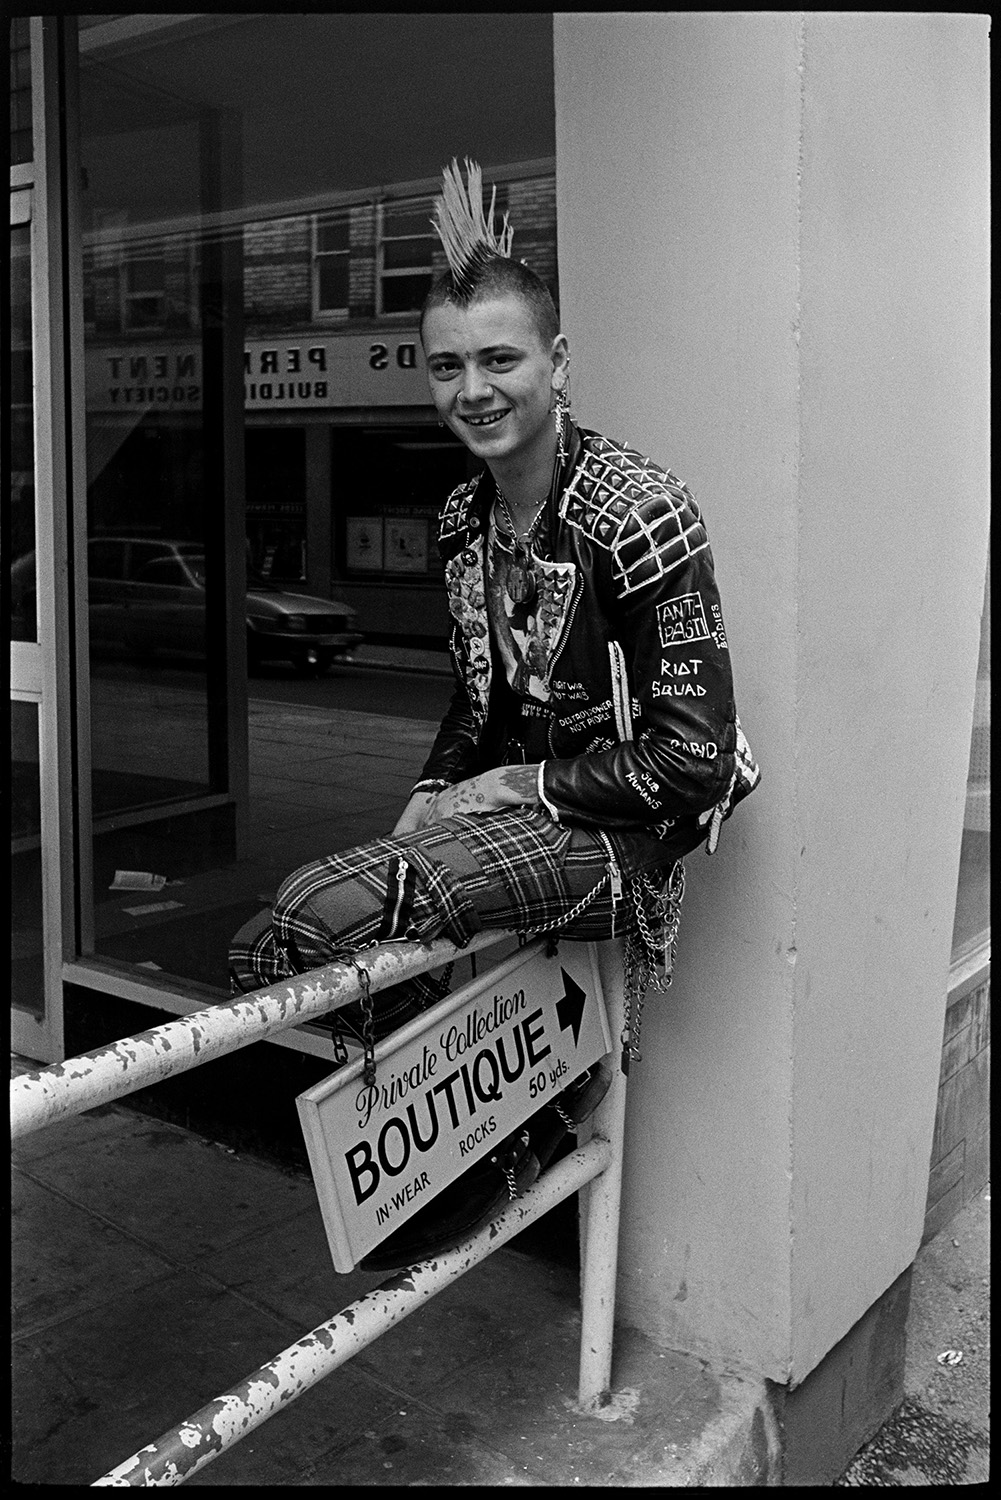 Three (very nice) skinheads or punks in town, one with mohican haircut. Good clothes.
[A young man, or punk, dressed in tartan trousers, a leather jacket, and with a mohican haircut, sitting on a railing outside an empty shop window on Barnstaple High Street. A small sign for a boutique hangs on the railings.]